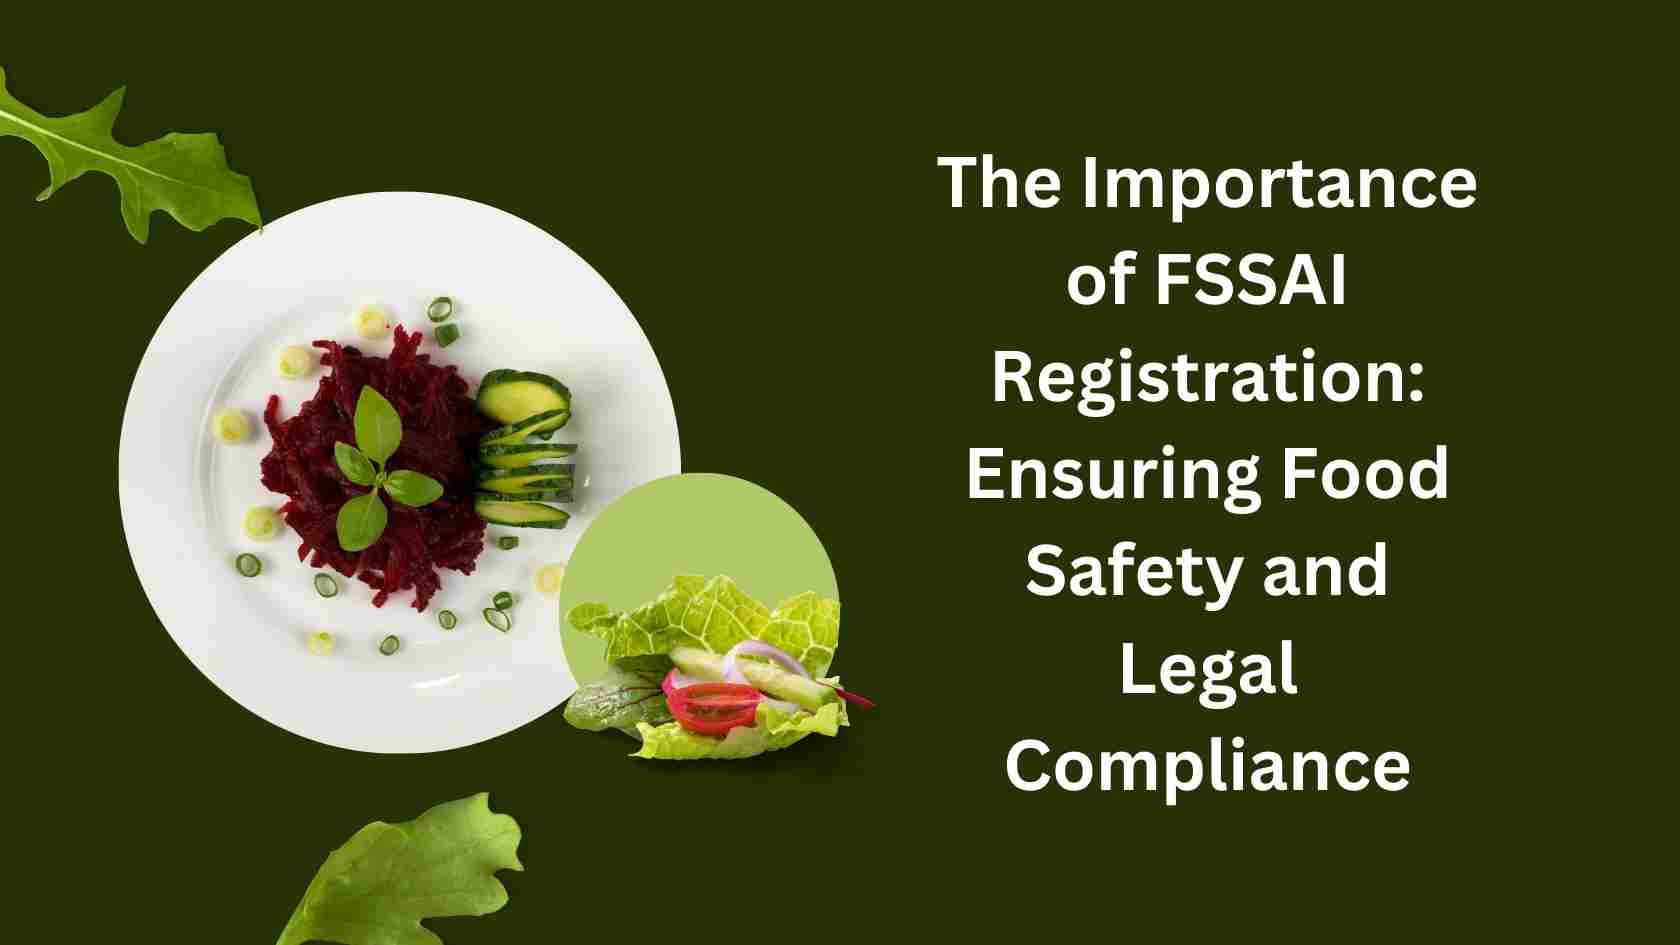 The Importance of FSSAI Registration: Ensuring Food Safety and Legal Compliance